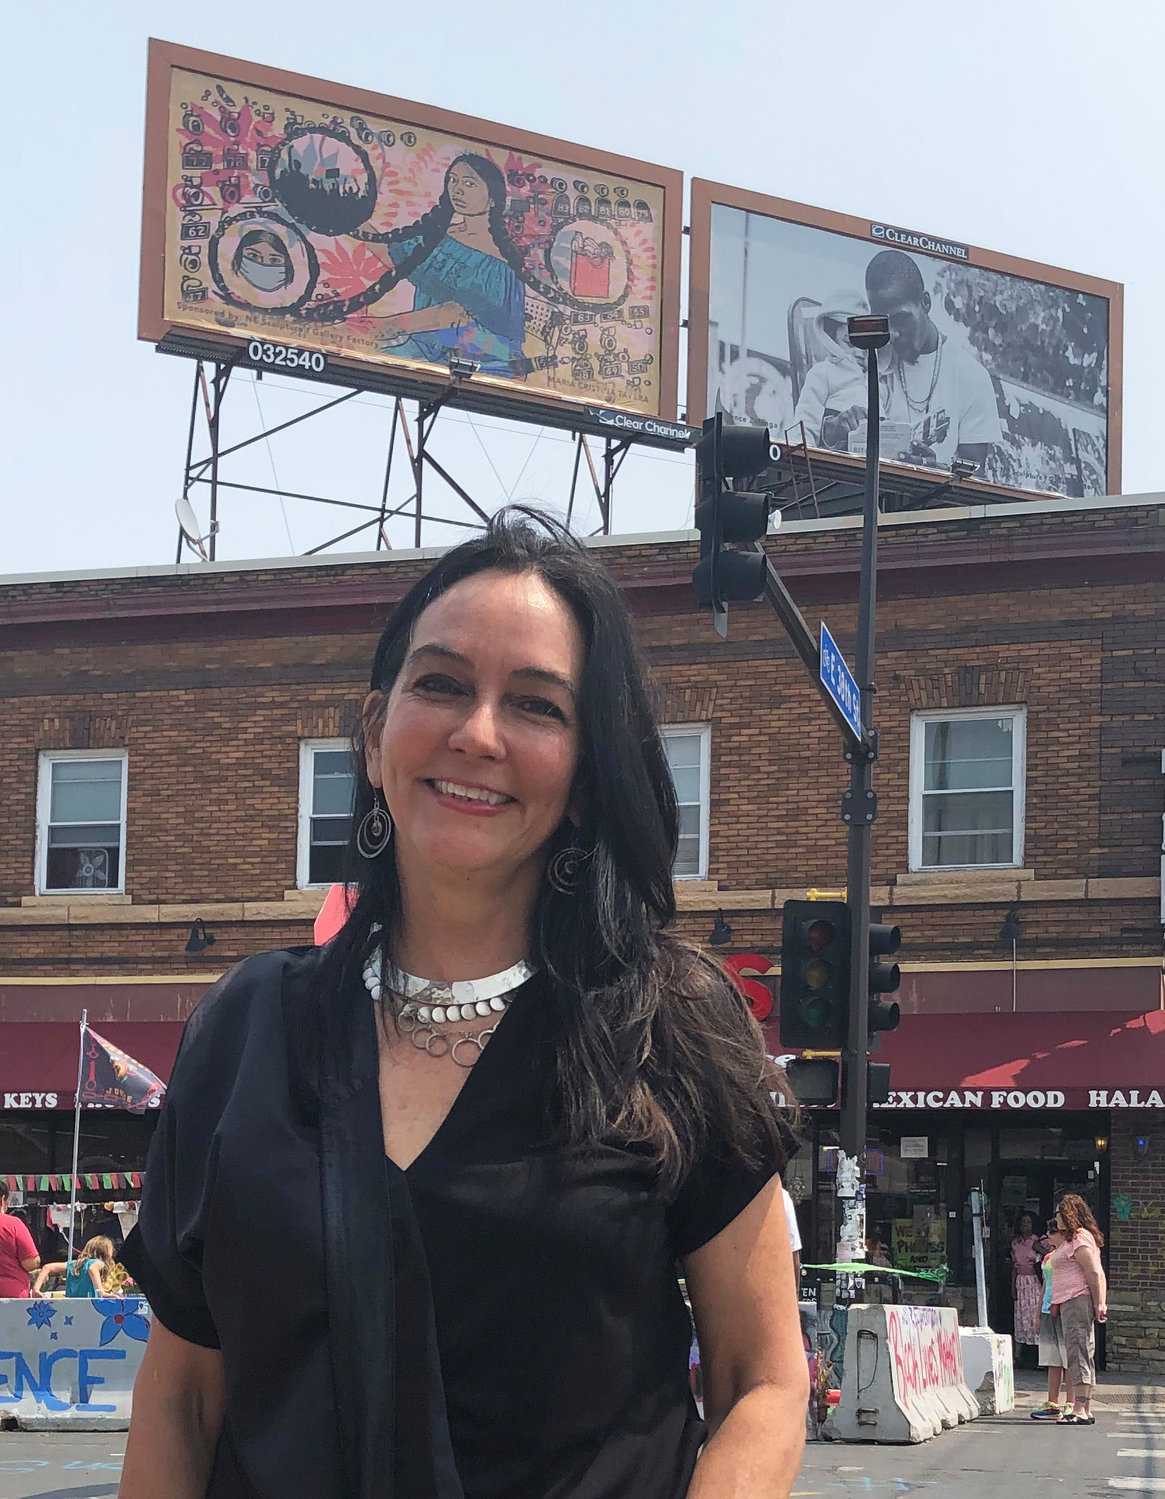 Tina Tavera stands with her billboard “La Conneccion” on the Cup Foods rooftop behind her. (Photo by Jill Boogren)